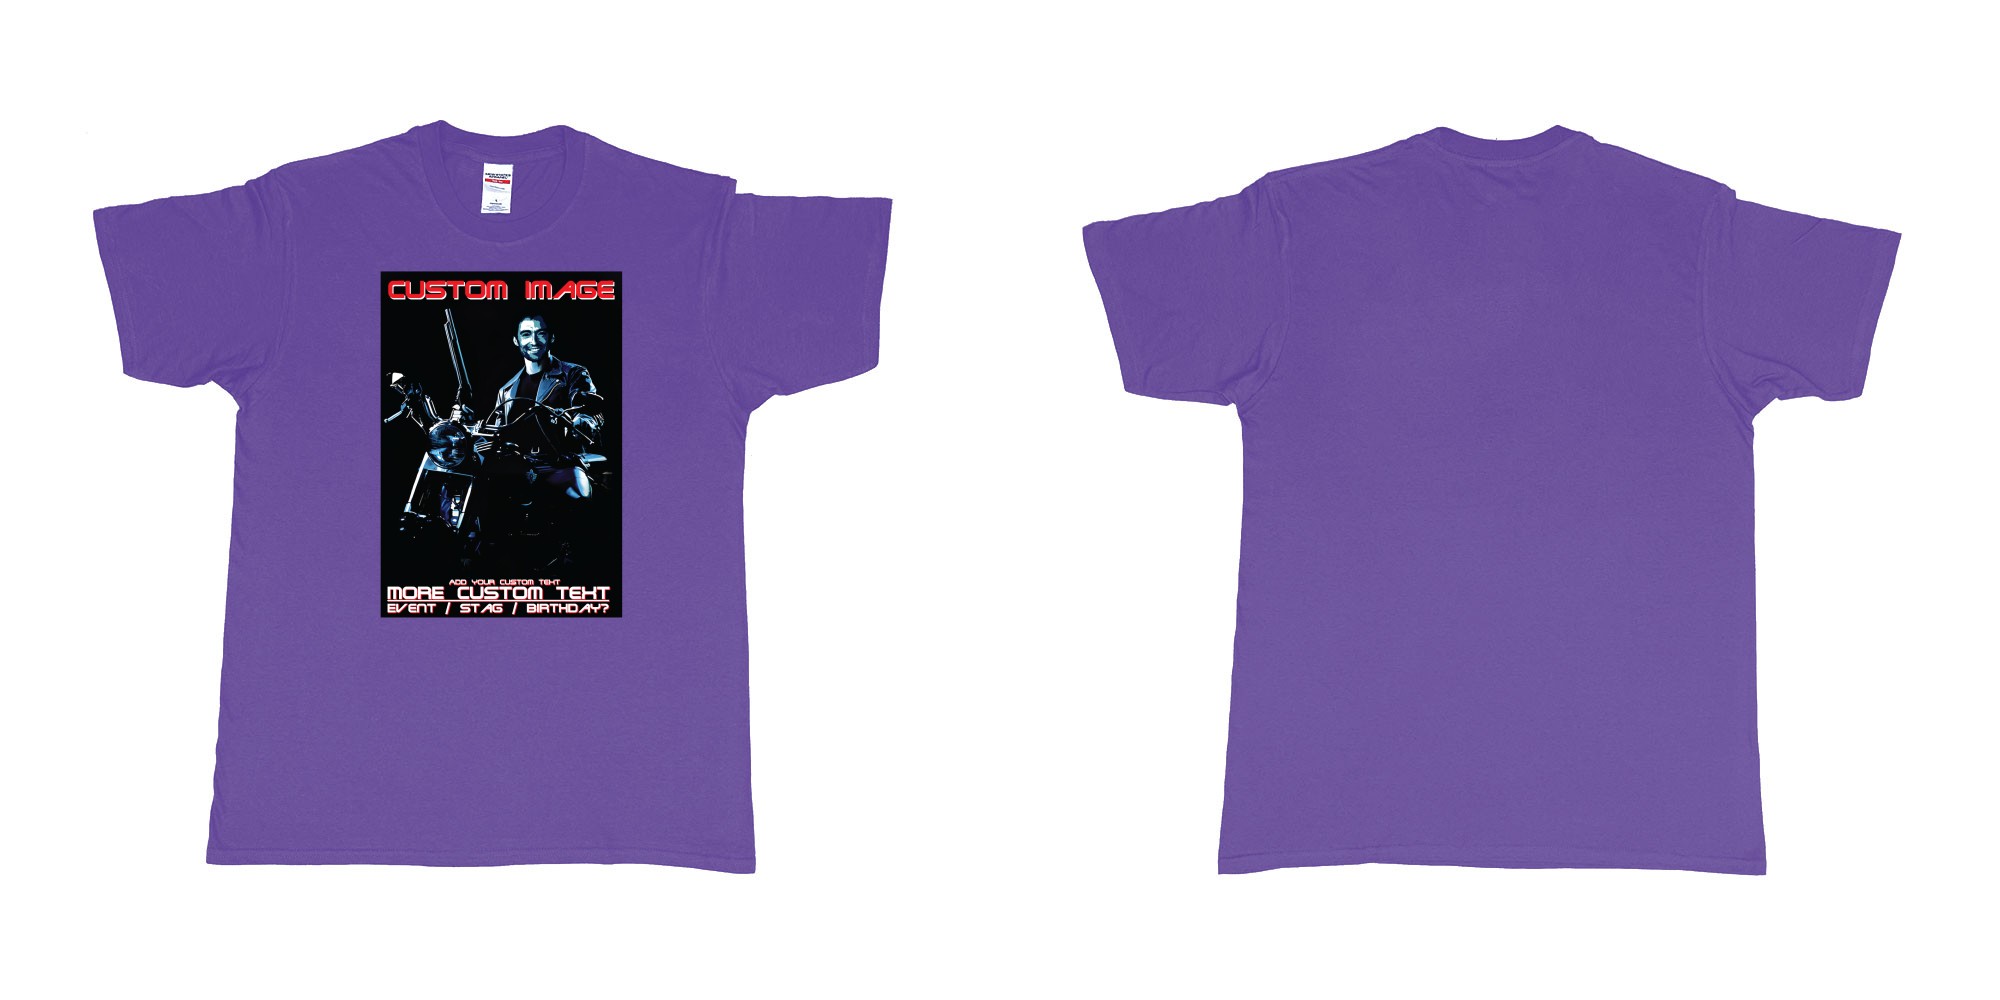 Custom tshirt design terminator 2 judgement day hugh jackman custom face in fabric color purple choice your own text made in Bali by The Pirate Way